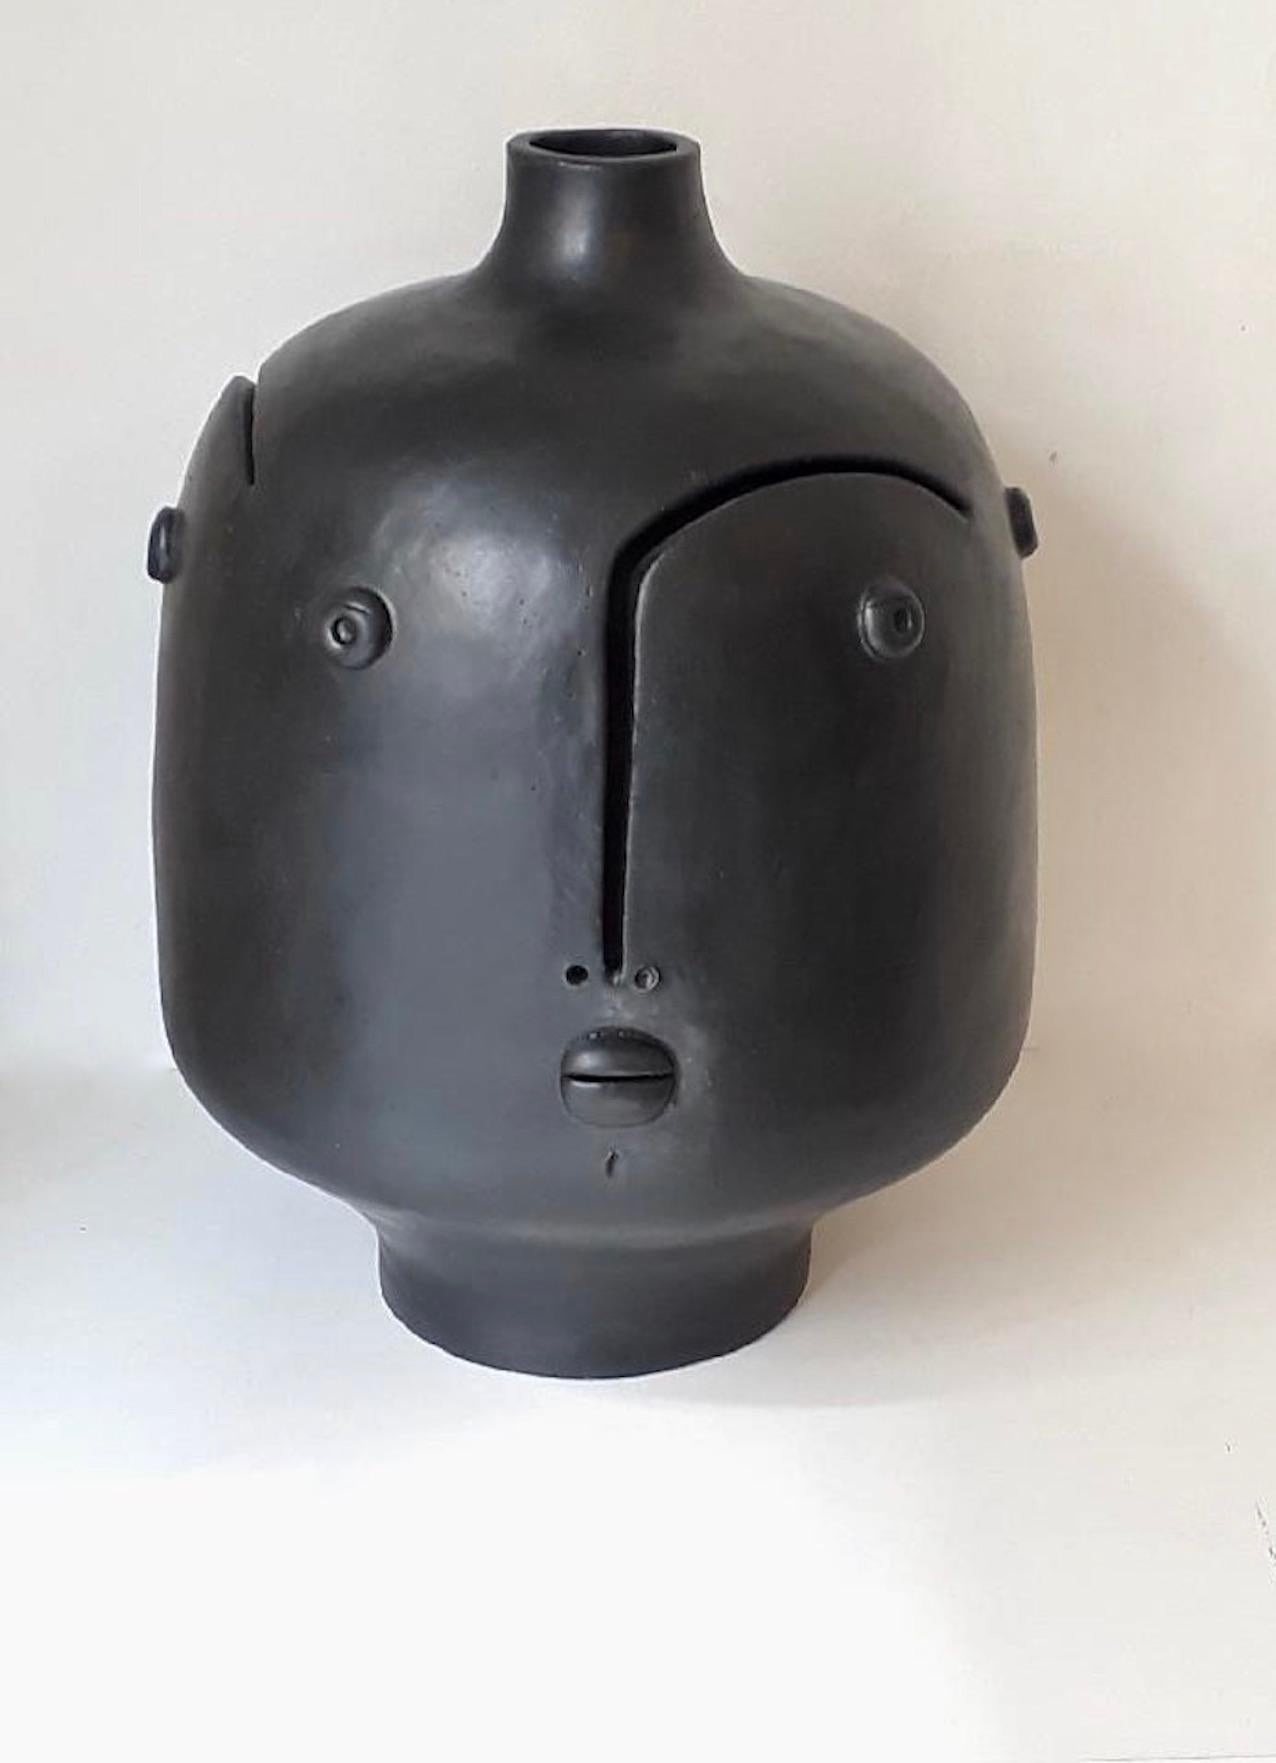 Hand-sculpted ceramic lamp base or sculpture with 3 faces 
One of a kind stoneware piece glazed in satined black enamel signed by the French ceramicists Dalo 
The height dimension is for the ceramic sculpture solely 

Note to international